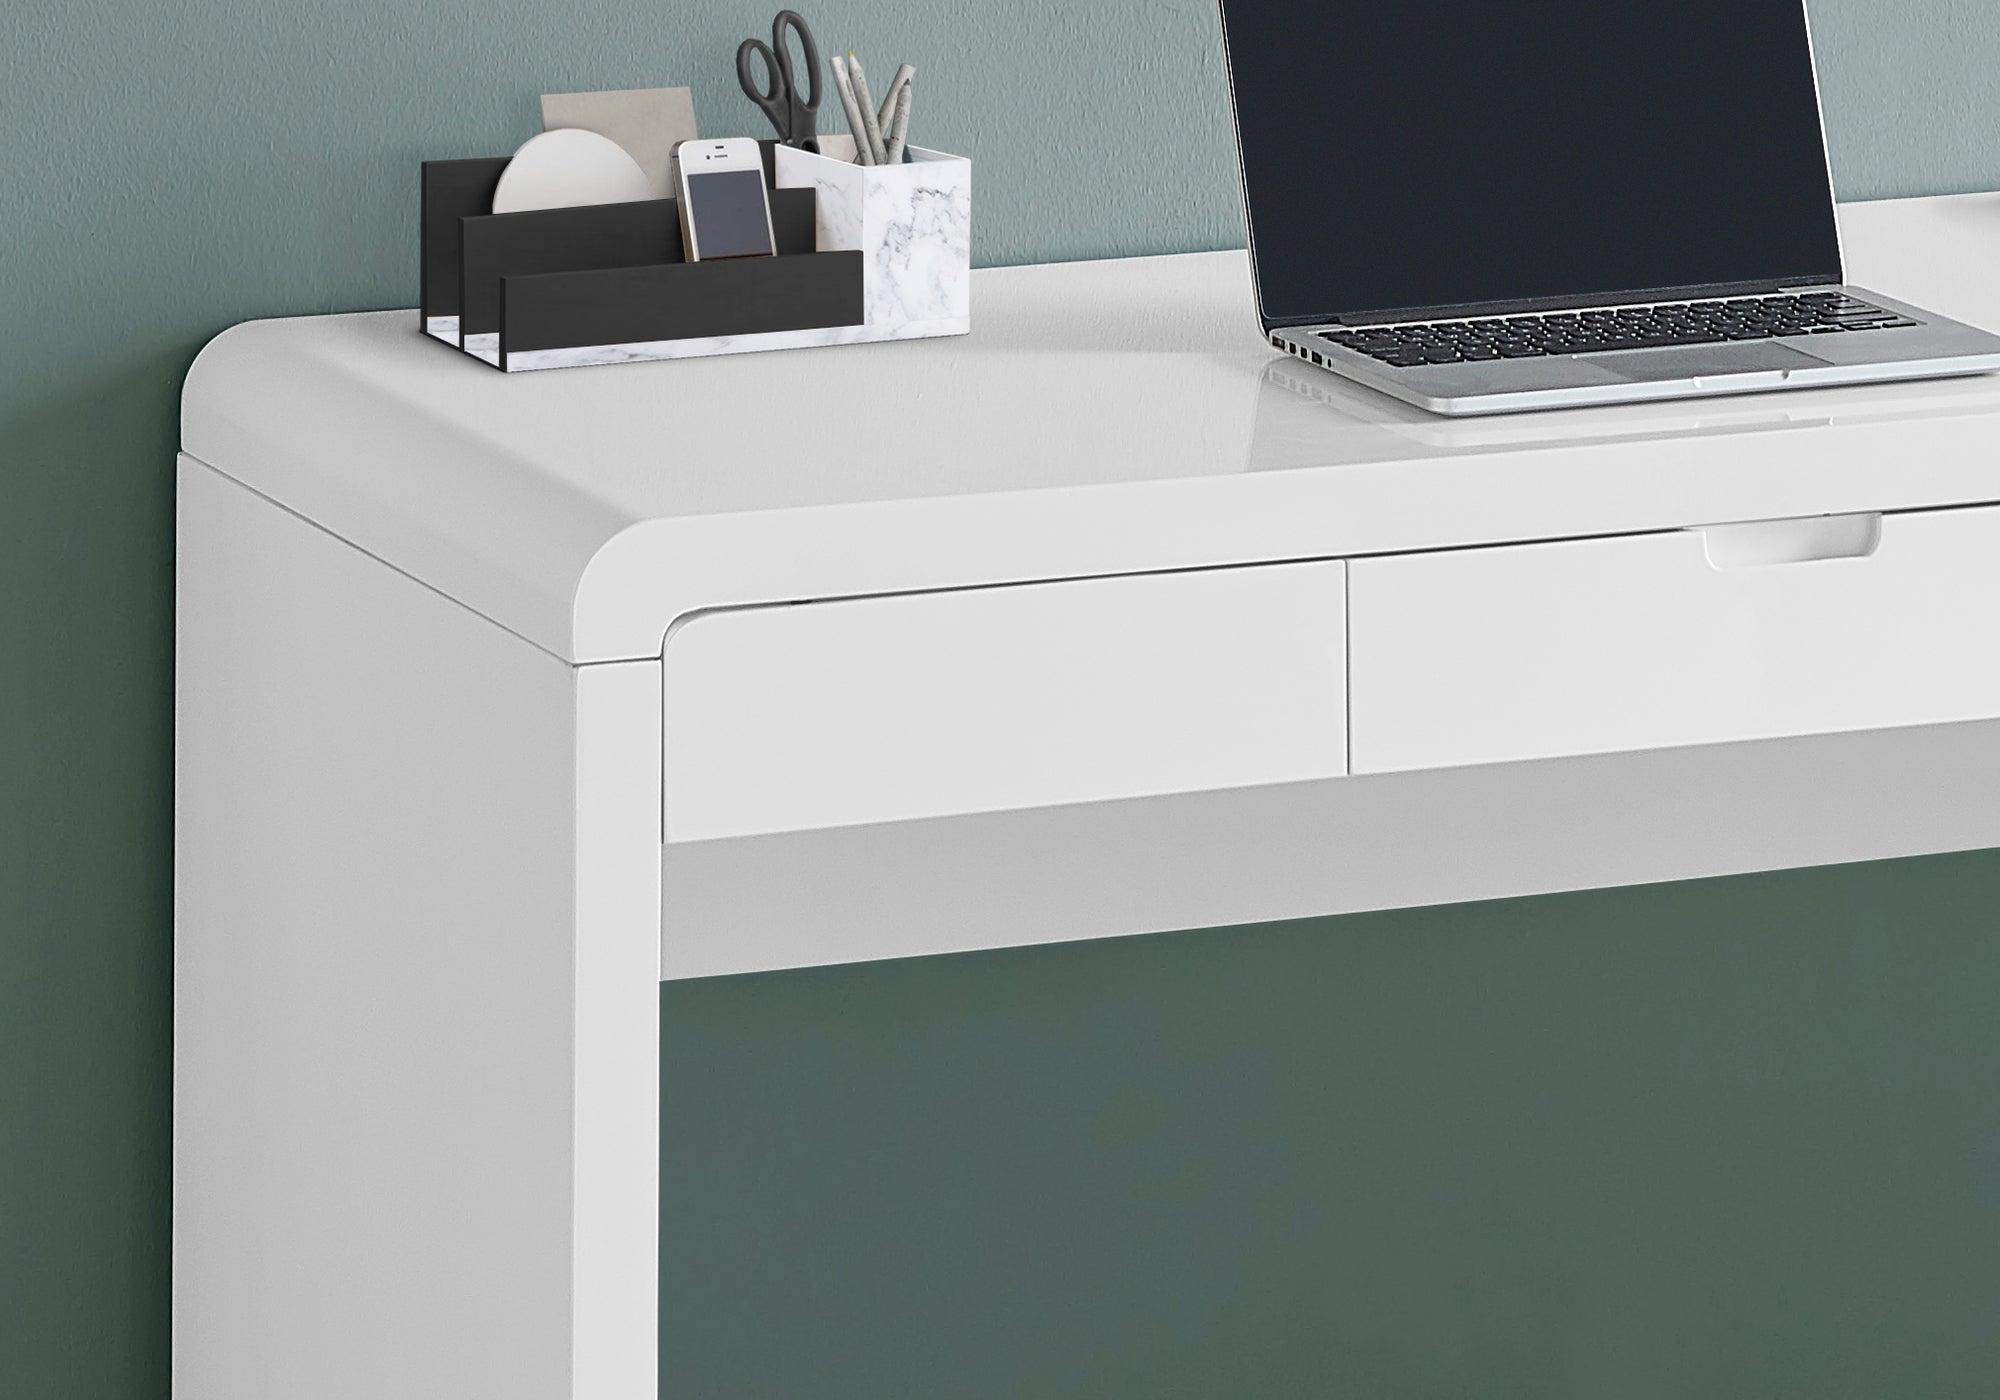 I 7580 - COMPUTER DESK - 48"L / HIGH GLOSSY WHITE / STORAGE DRAWER BY MONARCH SPECIALTIES INC